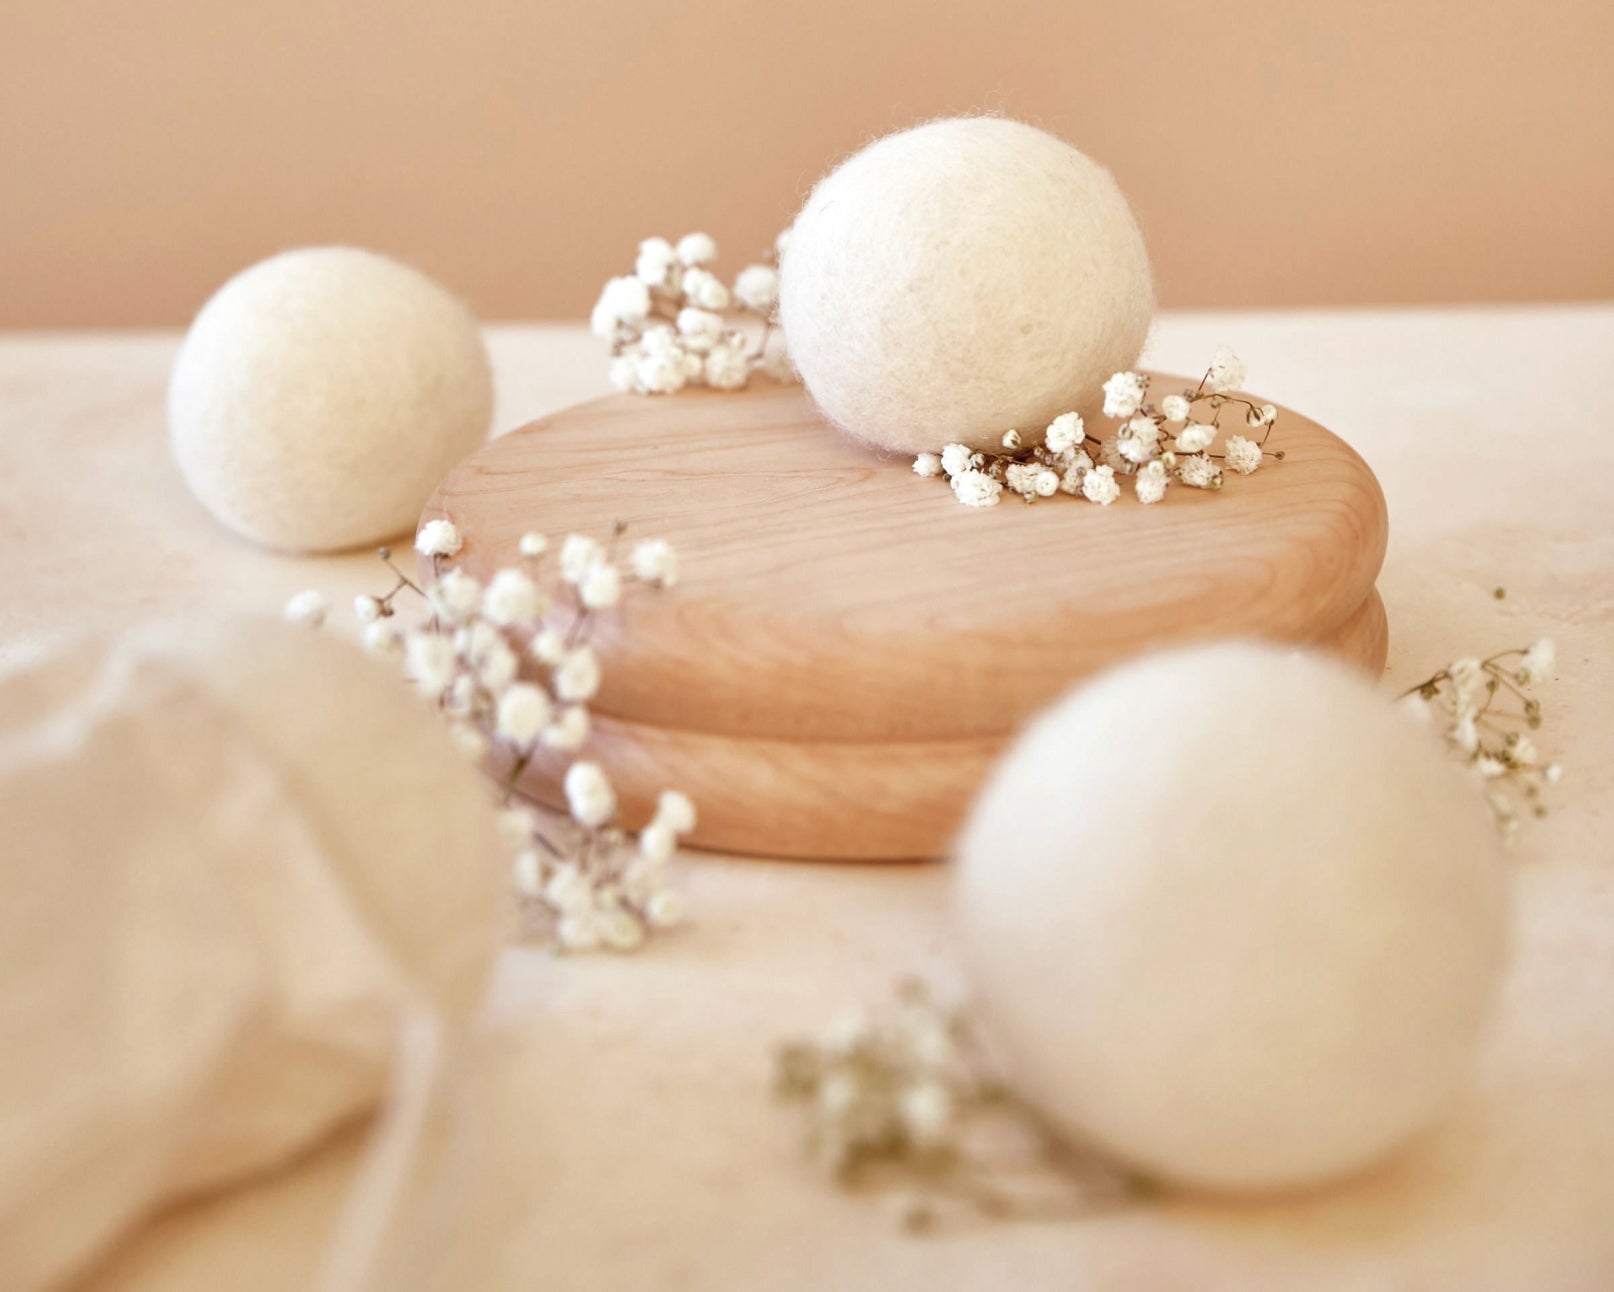 How To Add Essential Oil To Dryer Balls: The Complete Guide